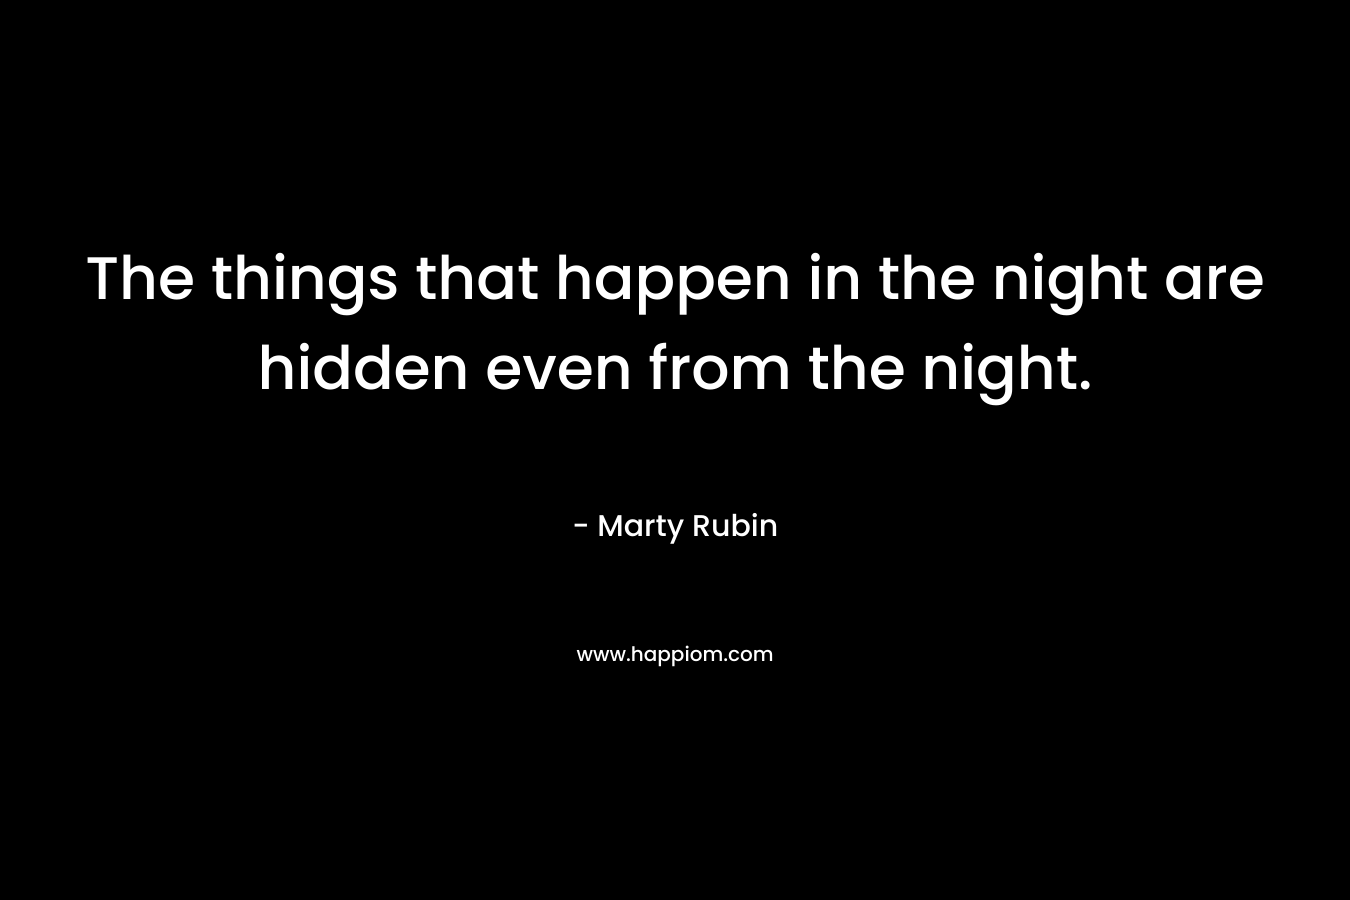 The things that happen in the night are hidden even from the night.